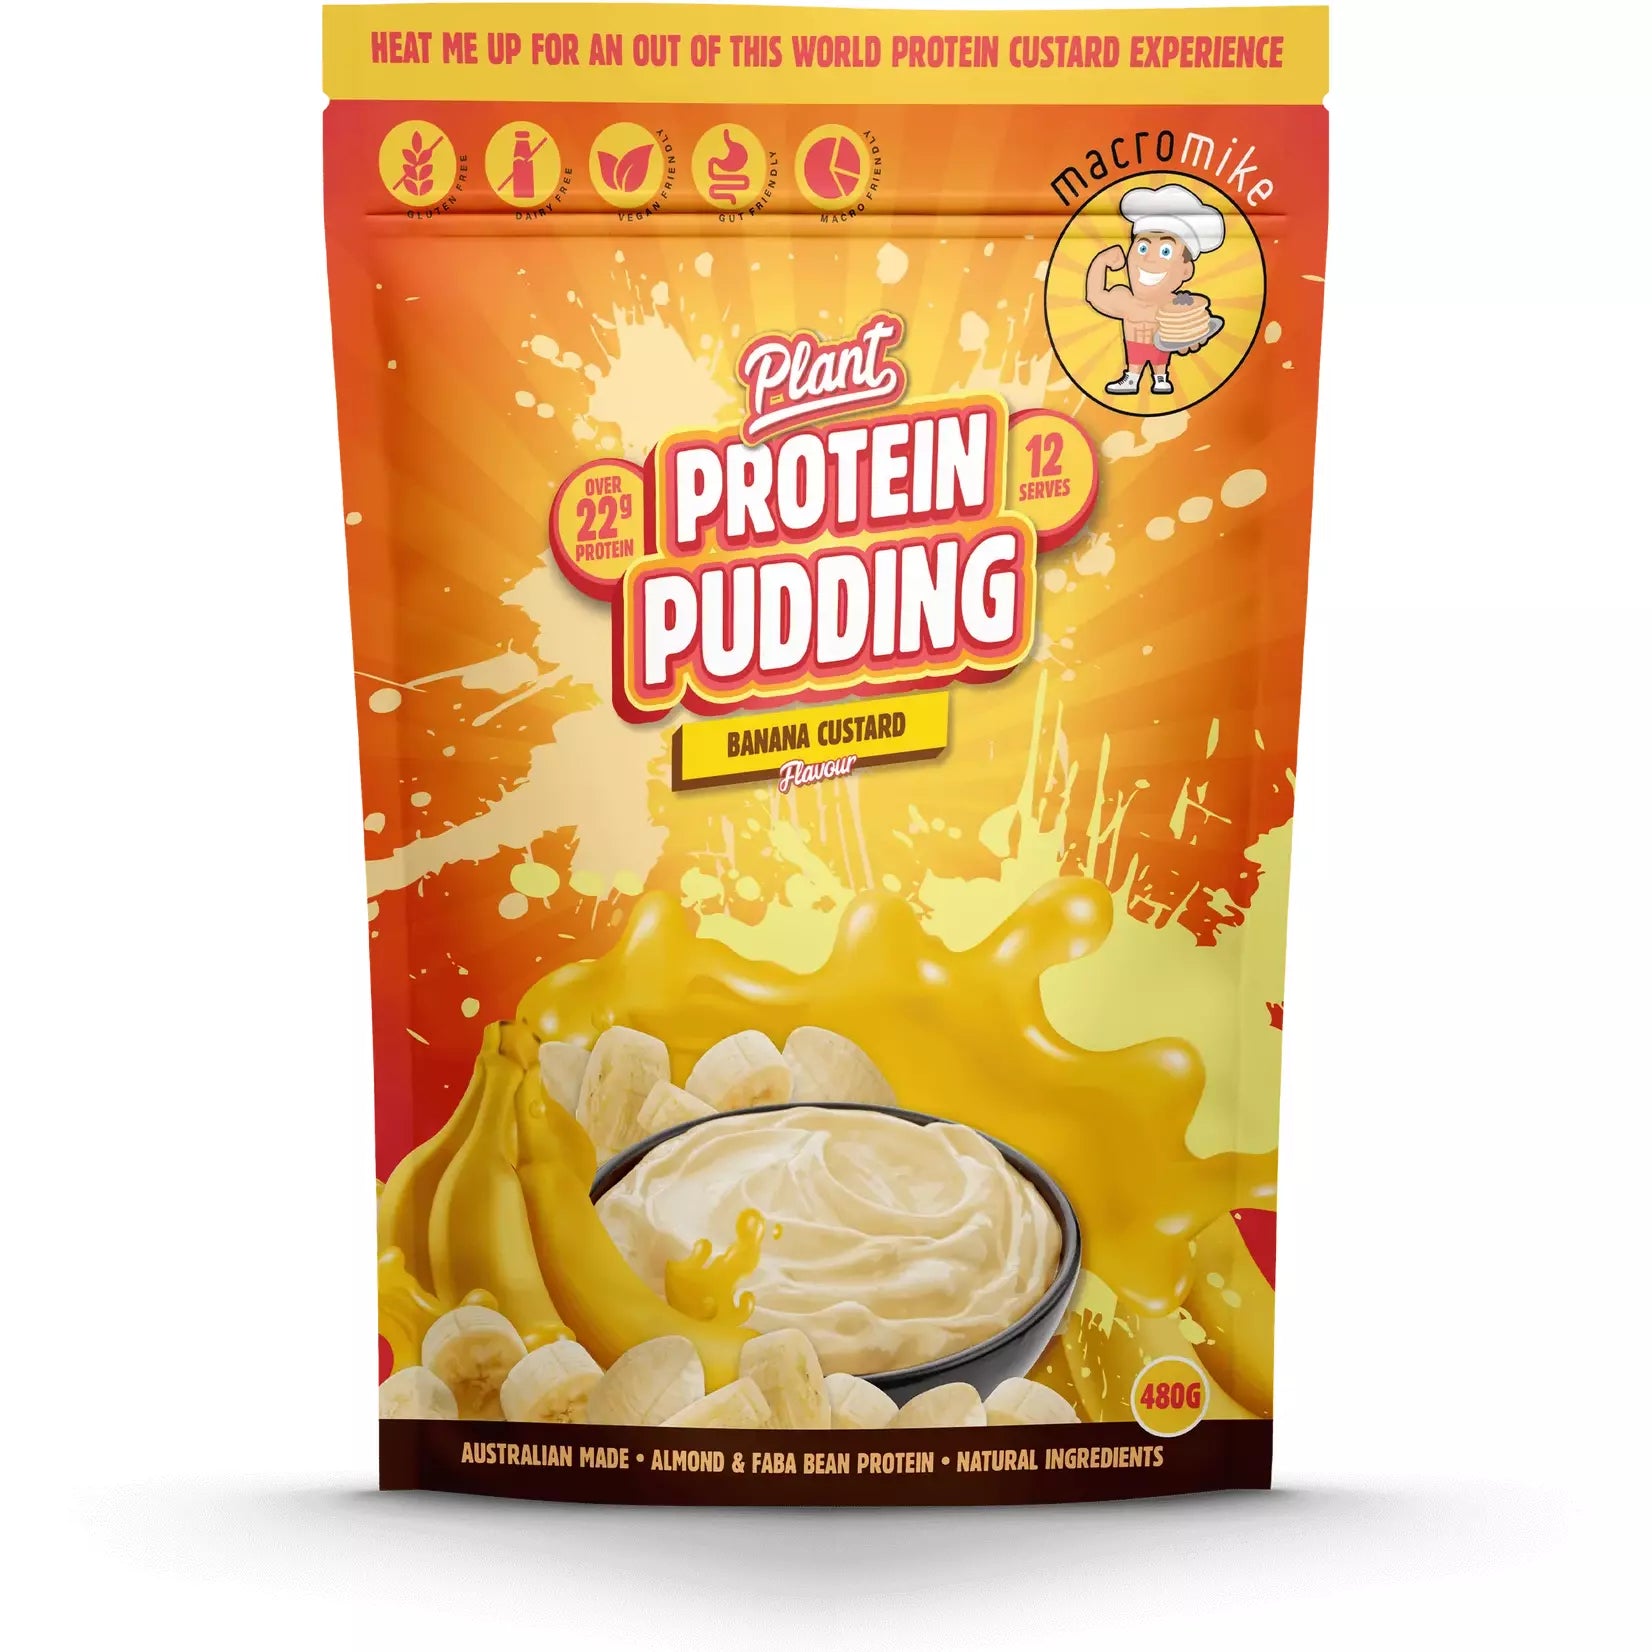 Macromike Protein Pudding